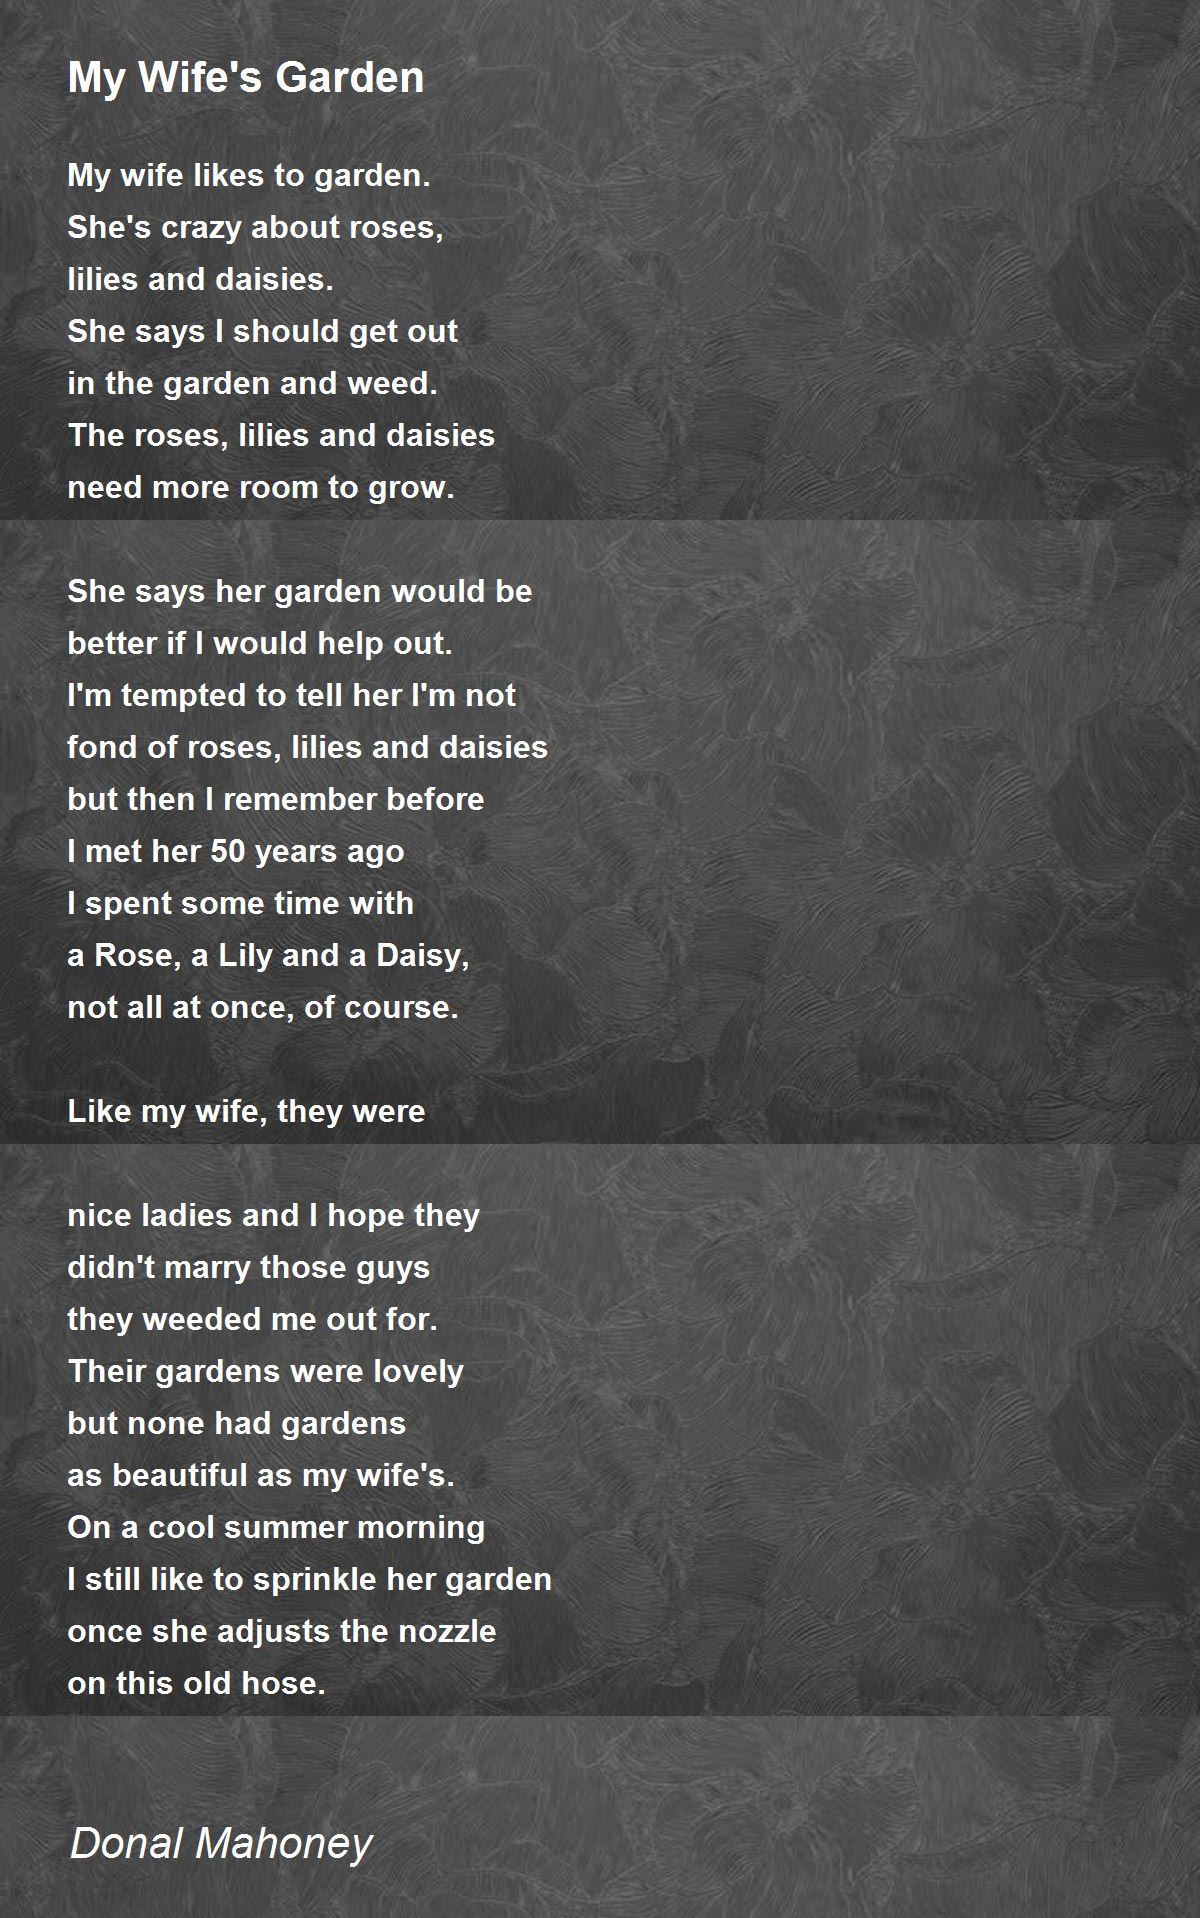 My Wifes Garden Poem by Donal Mahoney